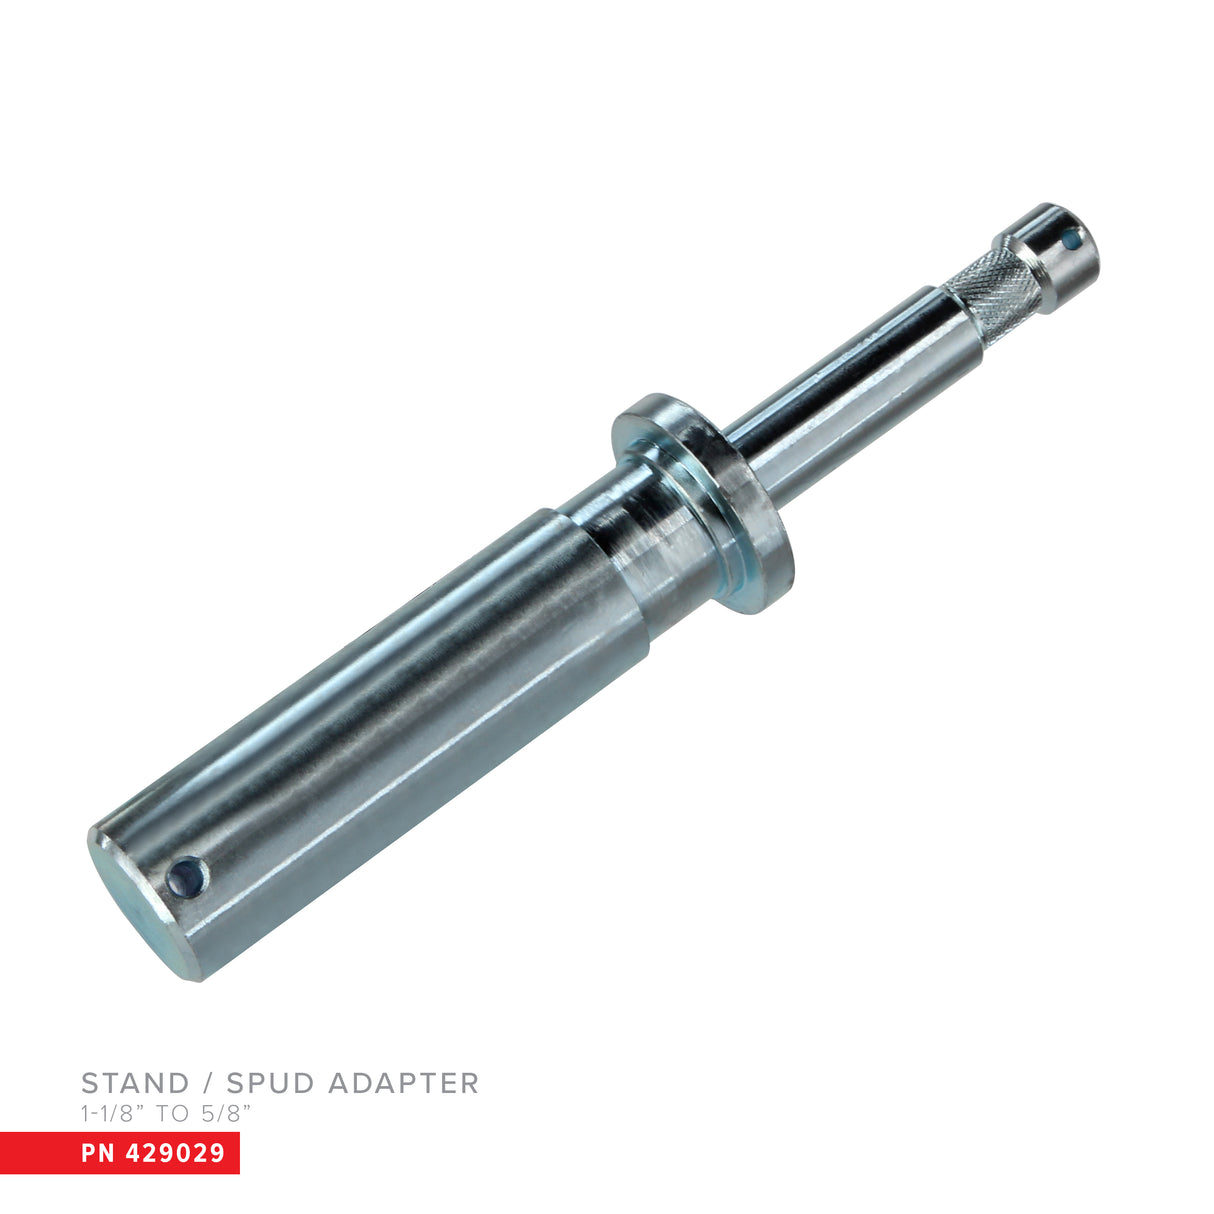 Stand/SPUD Adapter 1-1/8" to 5/8"